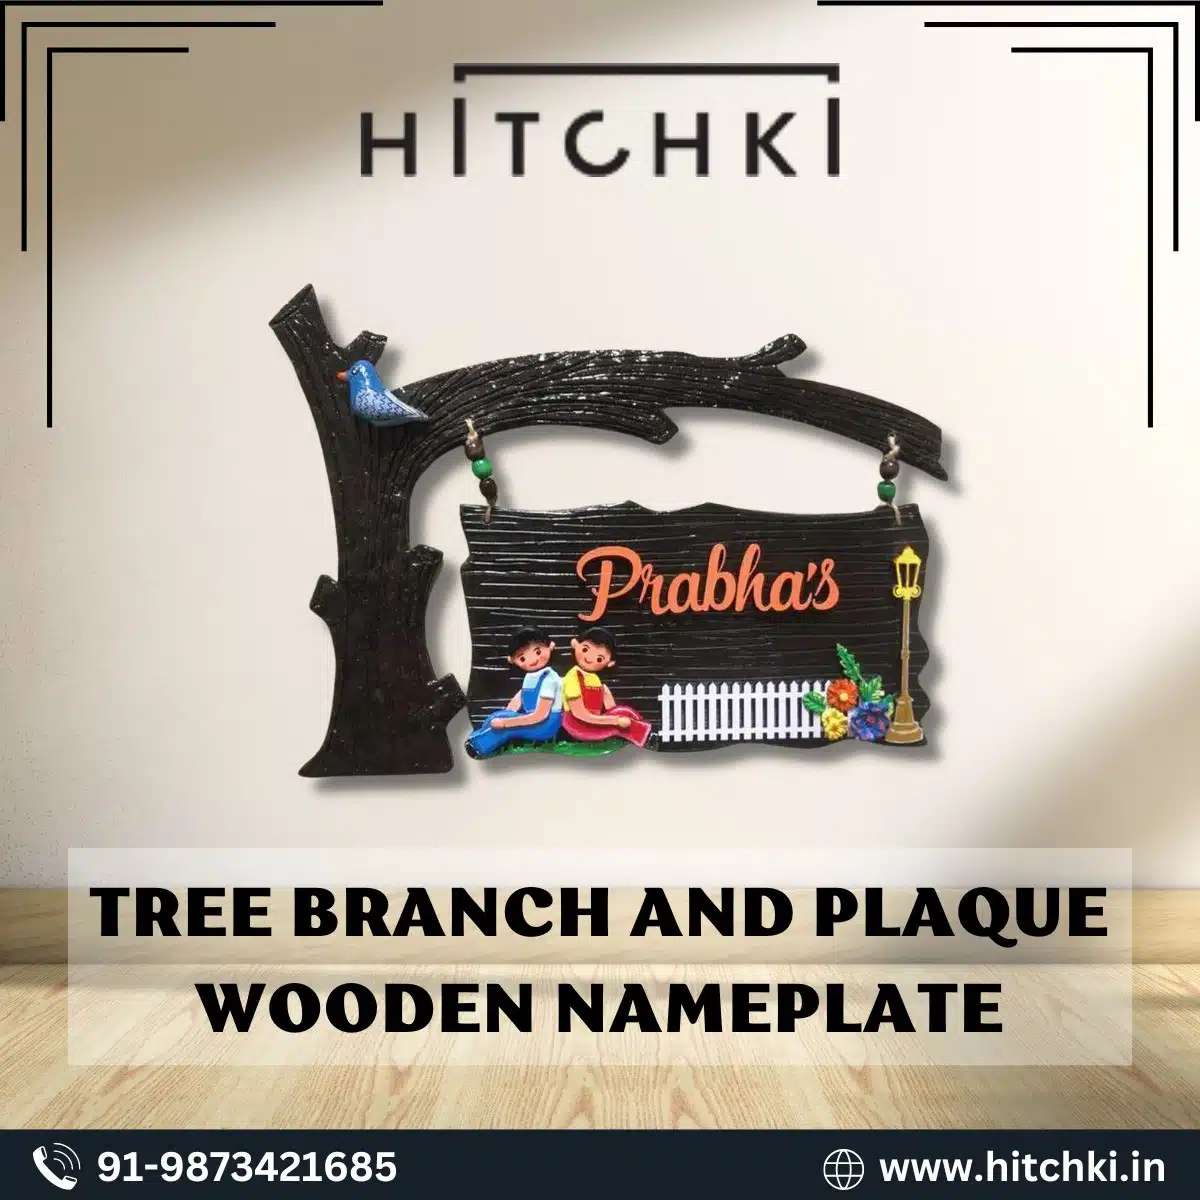 Hitchki Selling Tree Branch And Plaque Wooden Name Plate Online